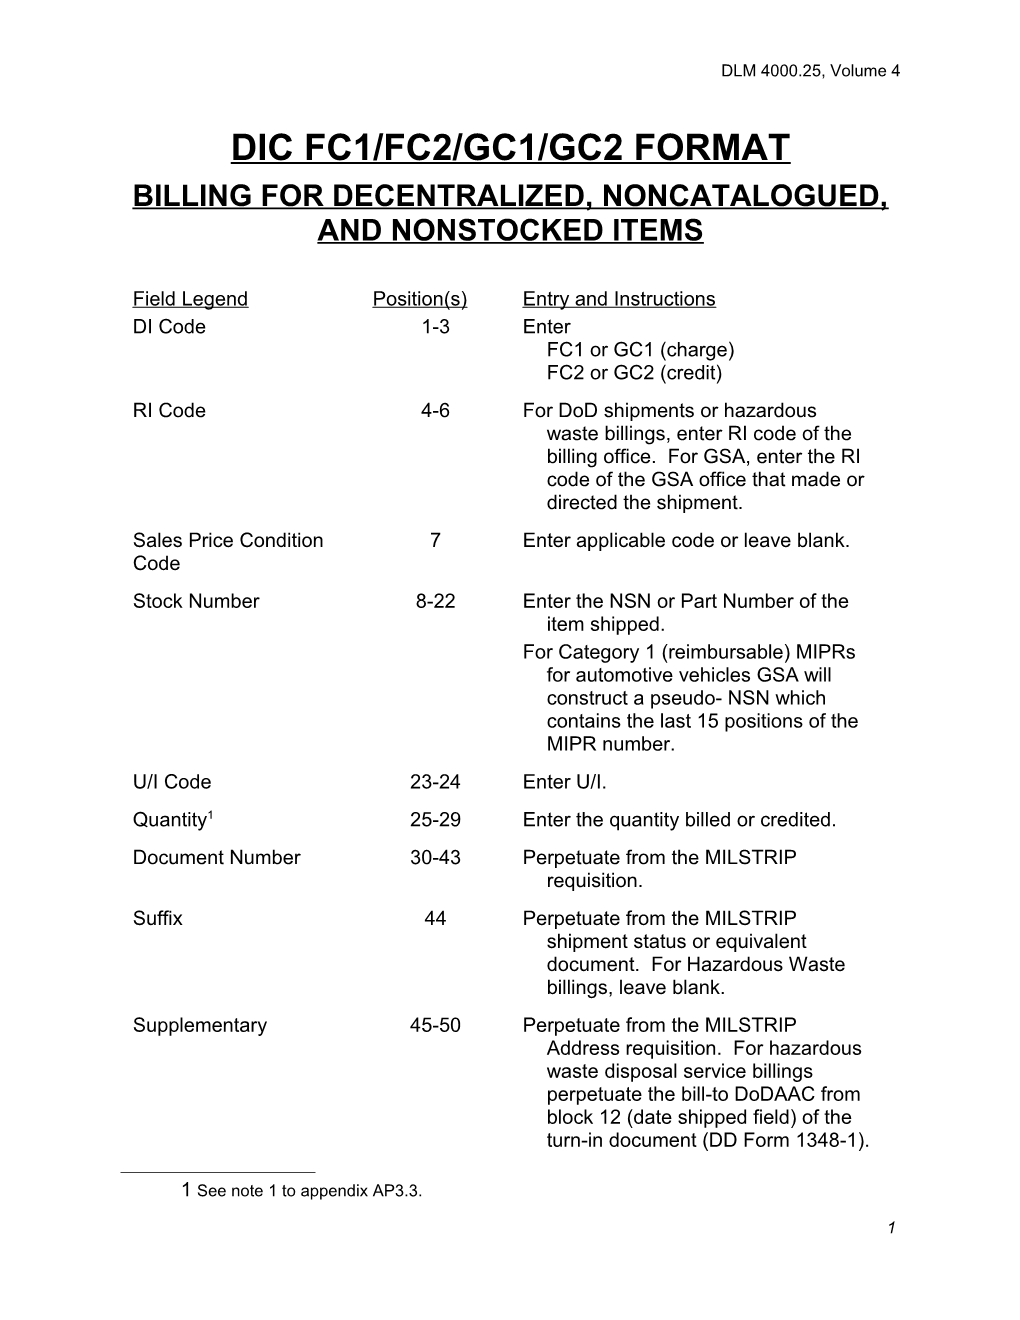 Ap3.8 Billing for Decentralized, Noncatalogued, and Nonstocked Items